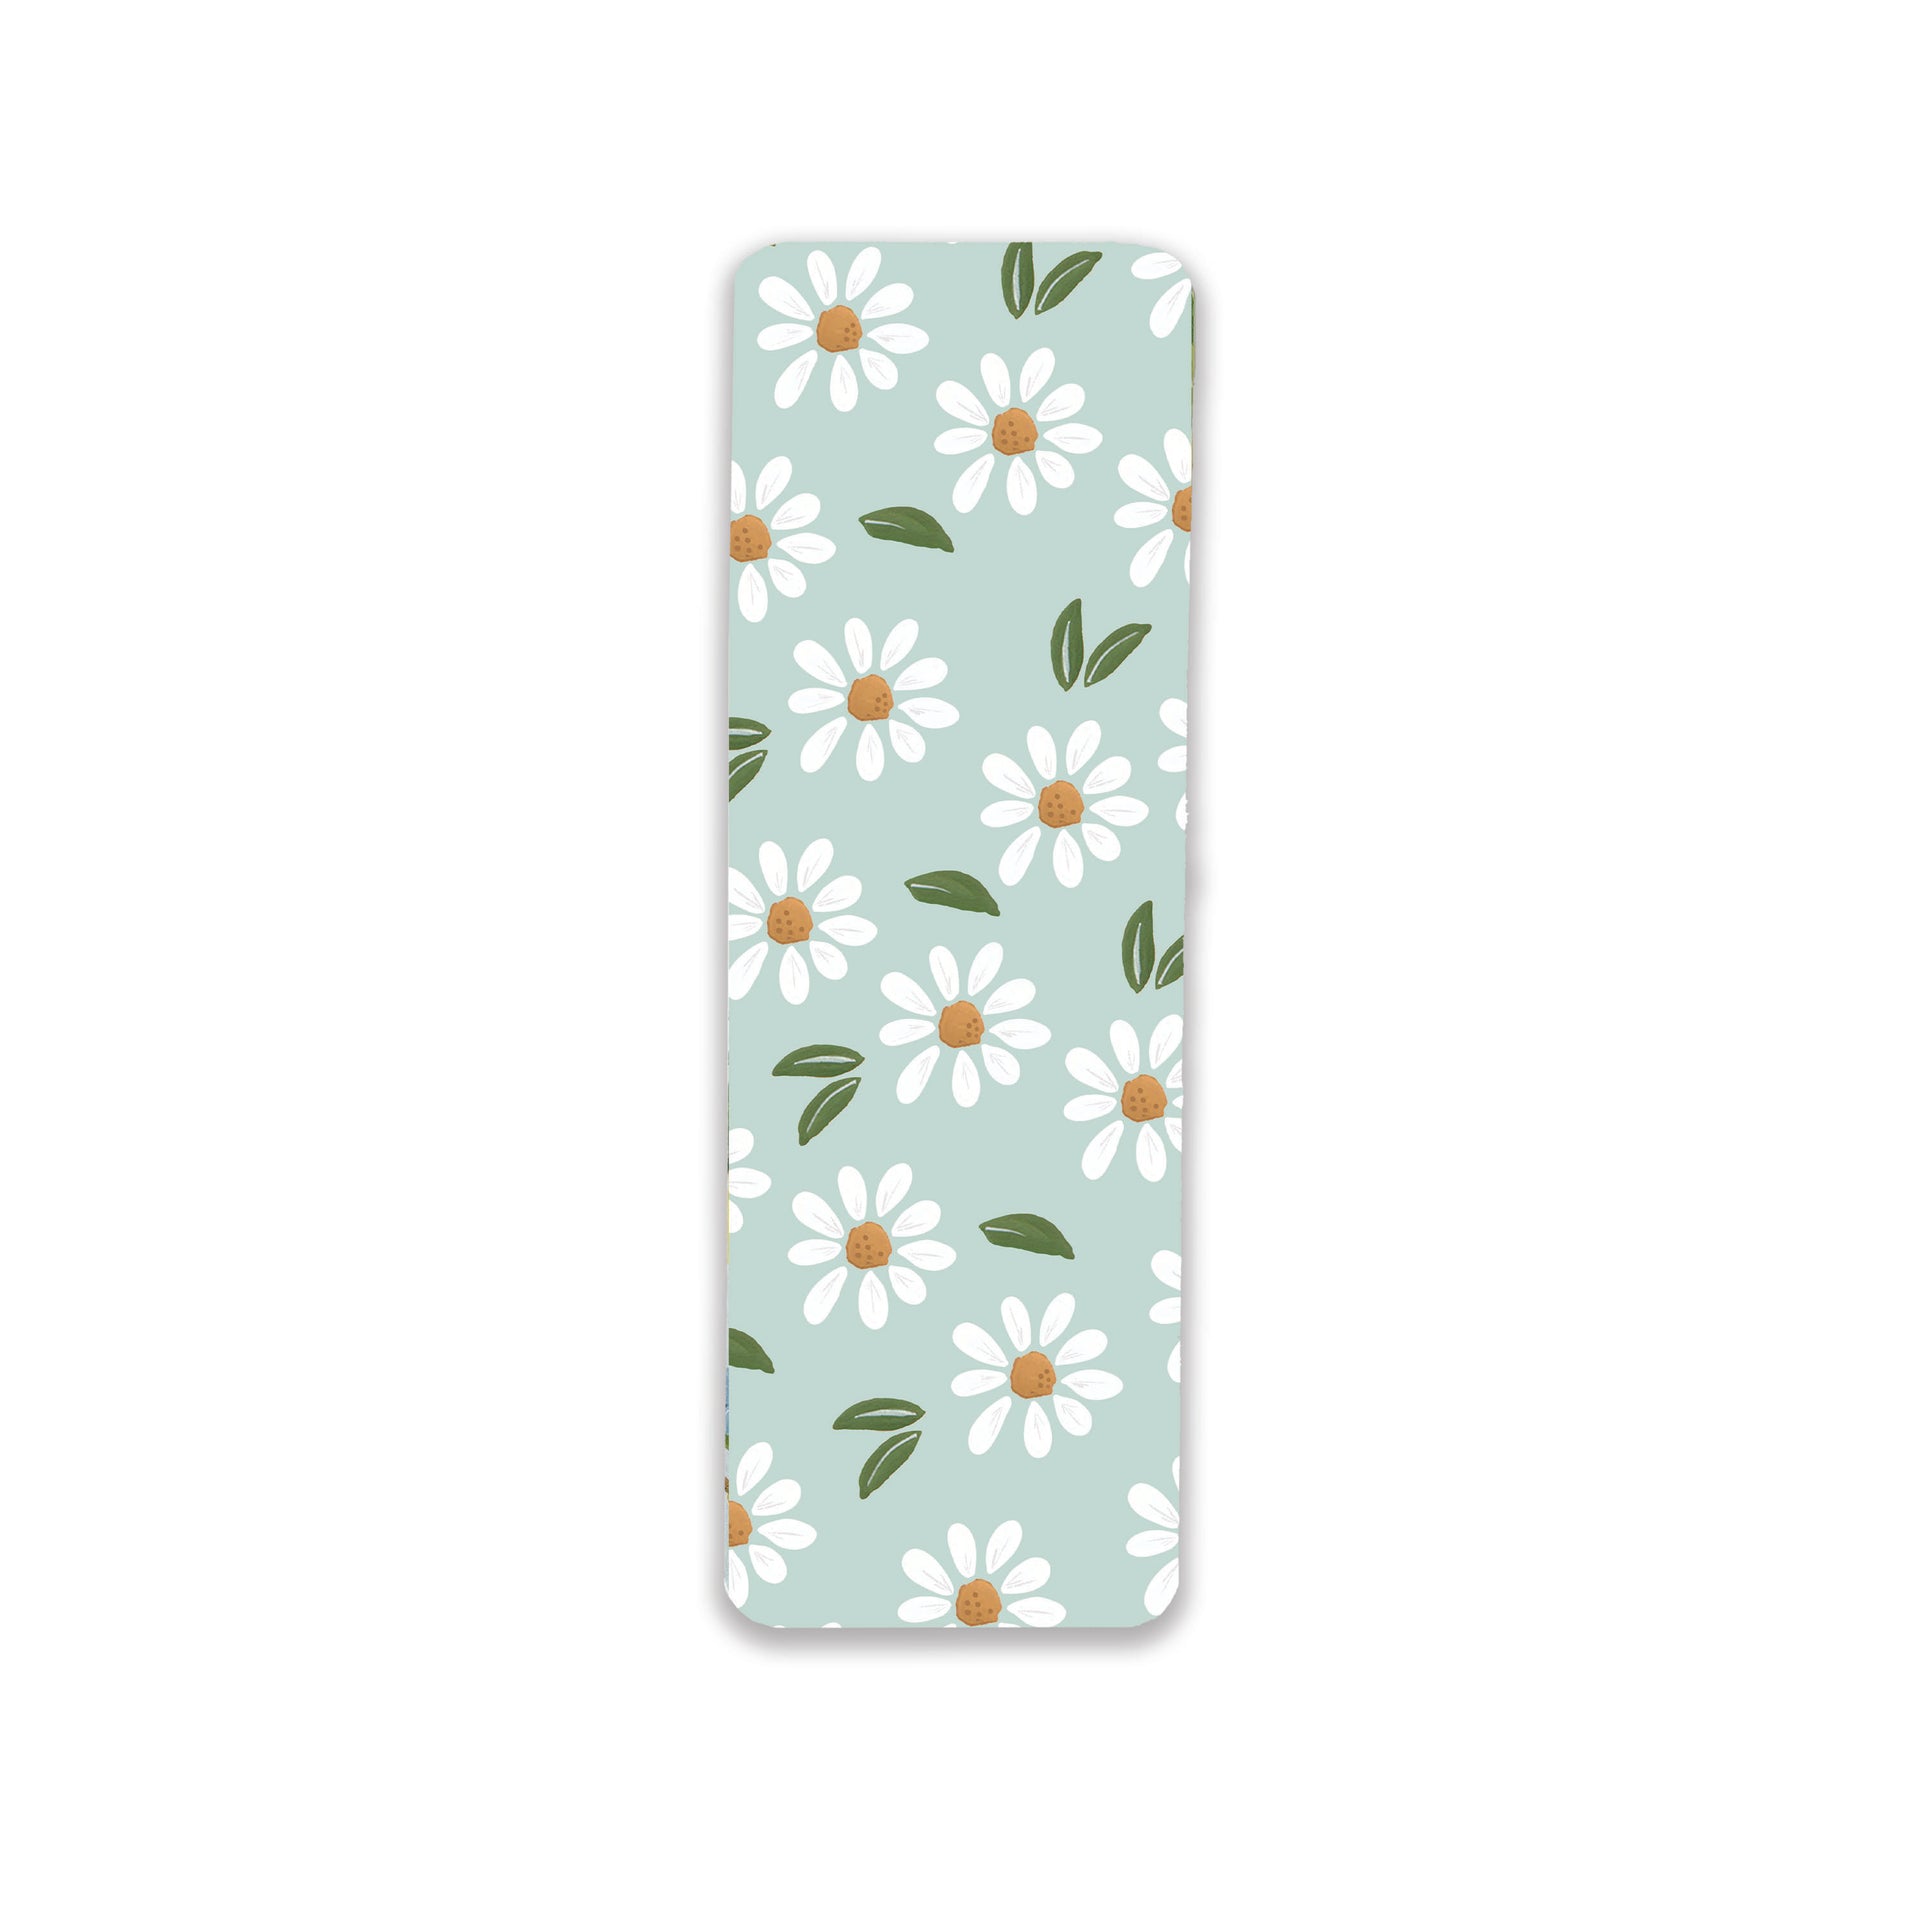 Daisy Clip Book Mark Journal Clip Very Cute Page Marker